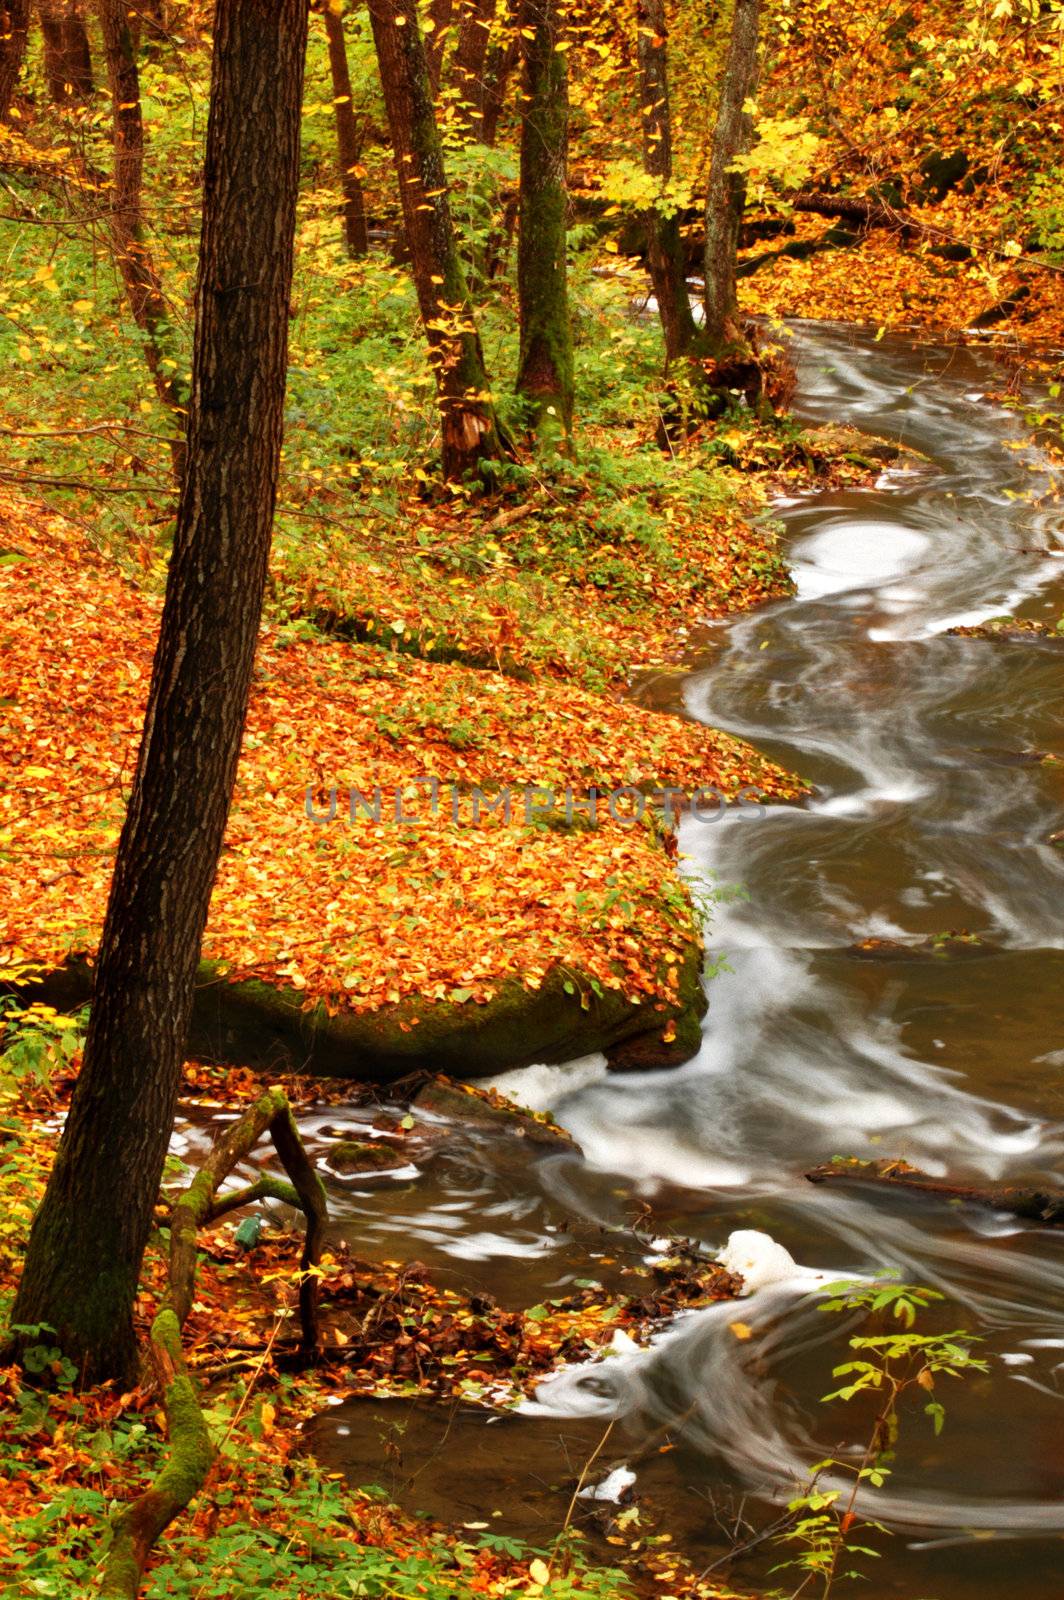 An image of blue river in autumn forest